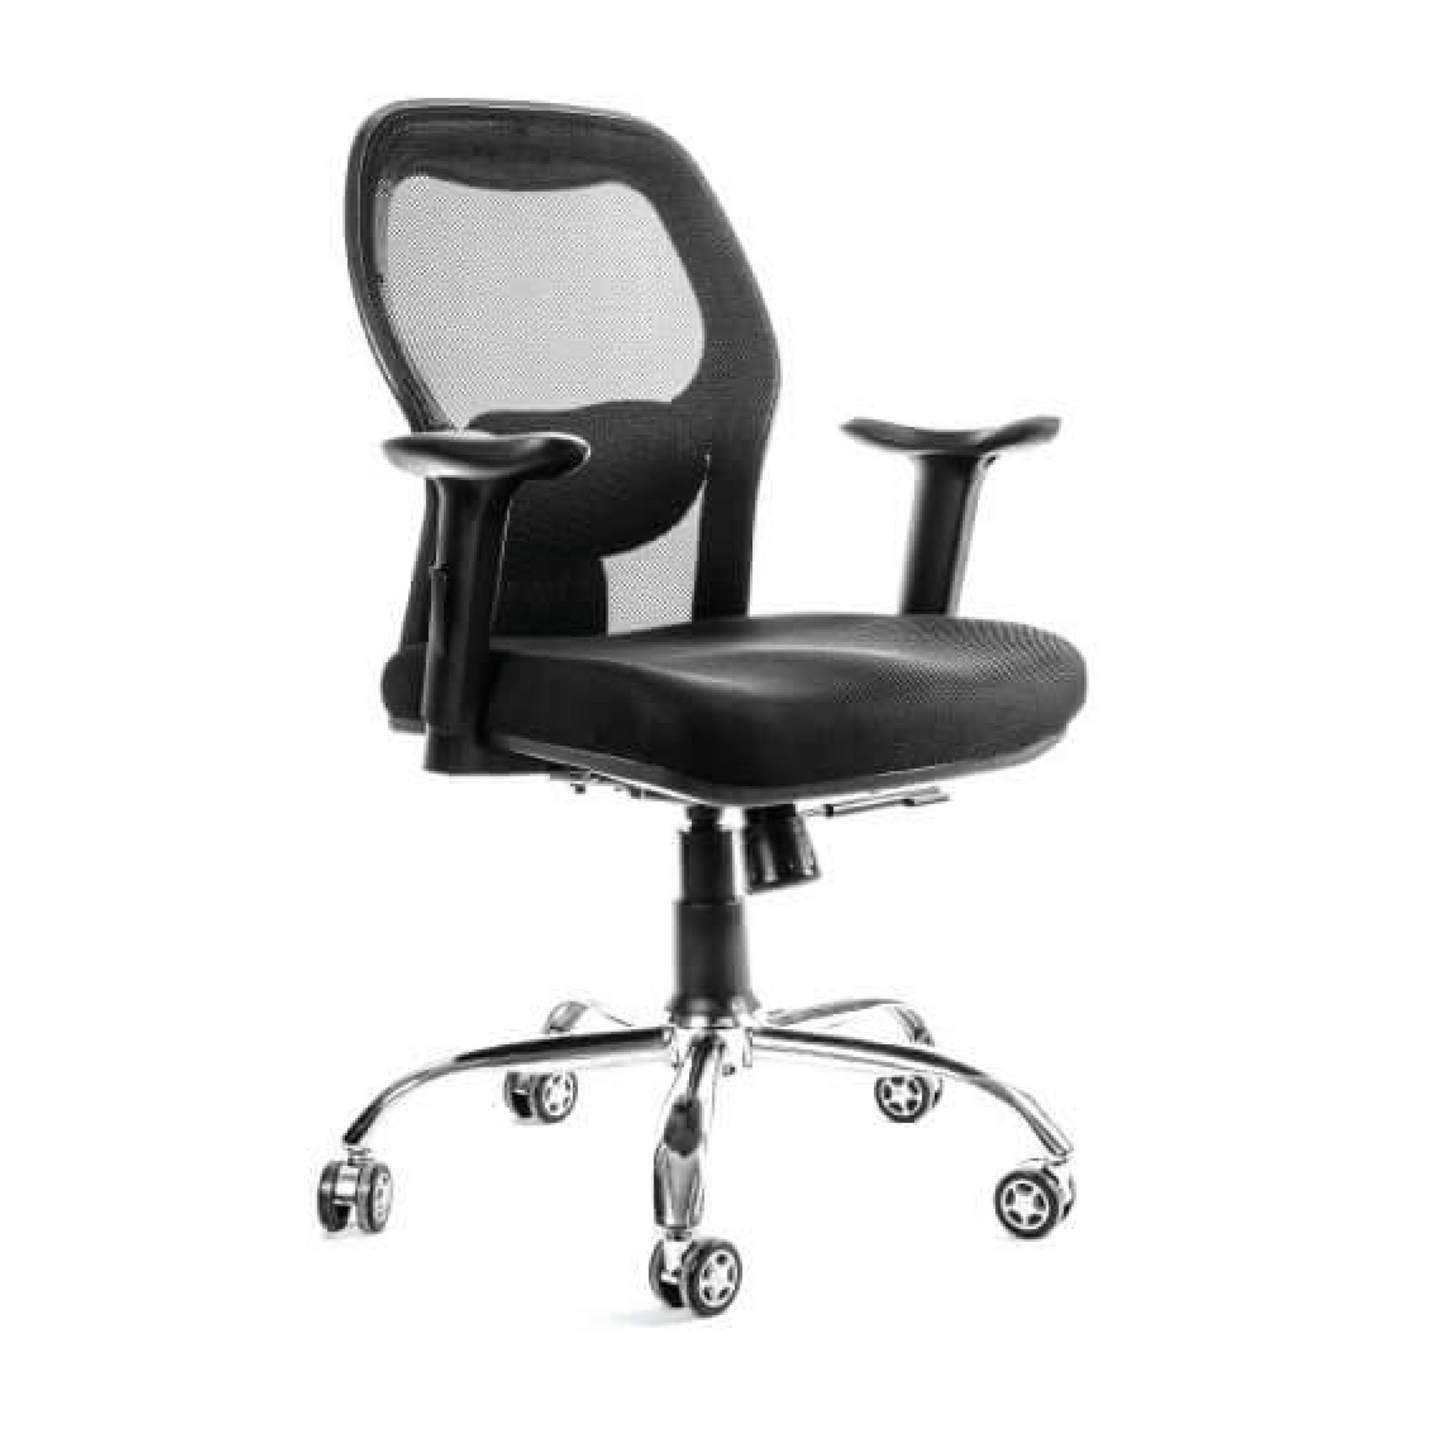 Best Office Chair - Model No. KP -WOLF MB DX